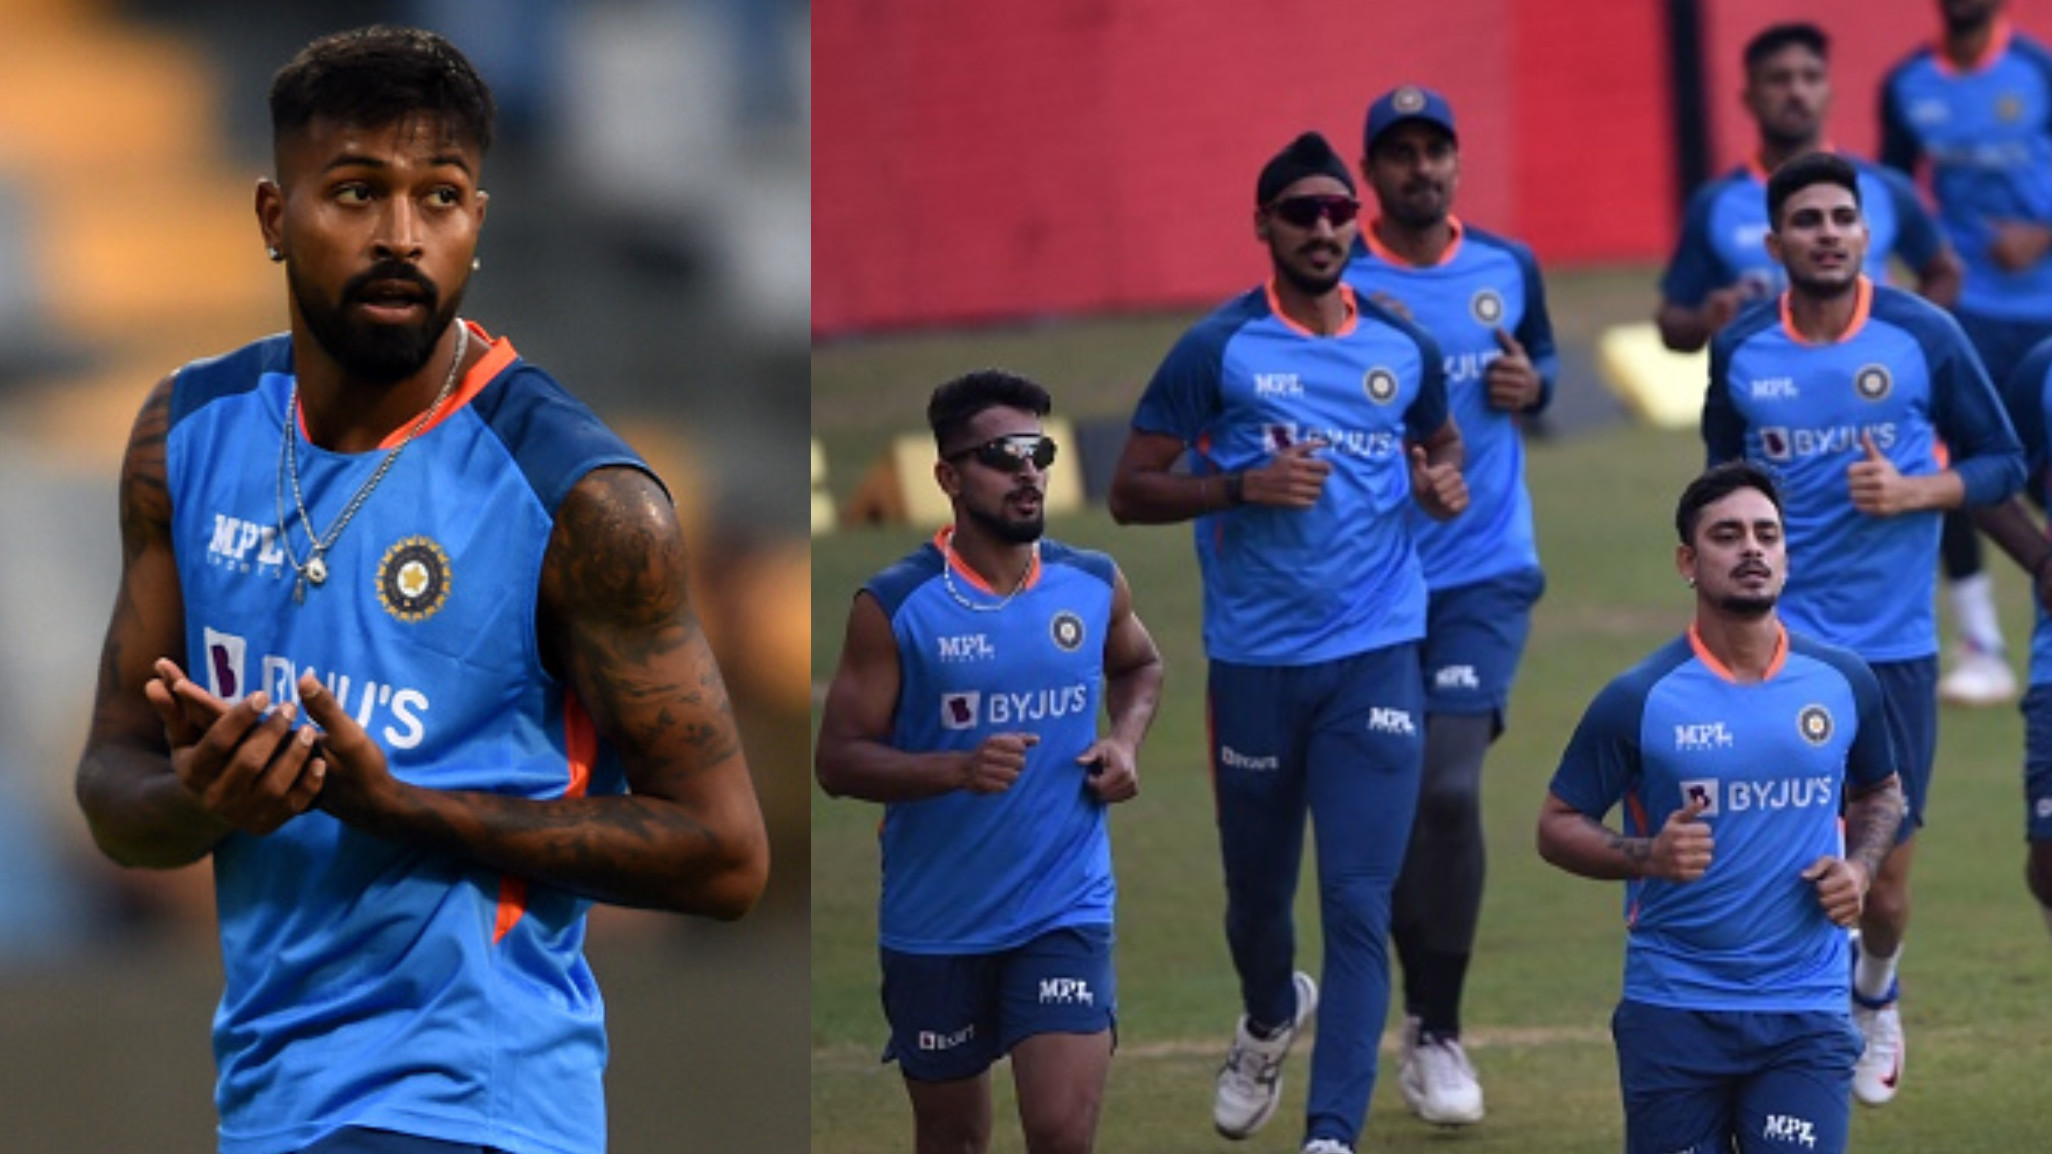 IND v SL 2023: COC Predicted Team India Playing XI for first T20I vs Sri Lanka